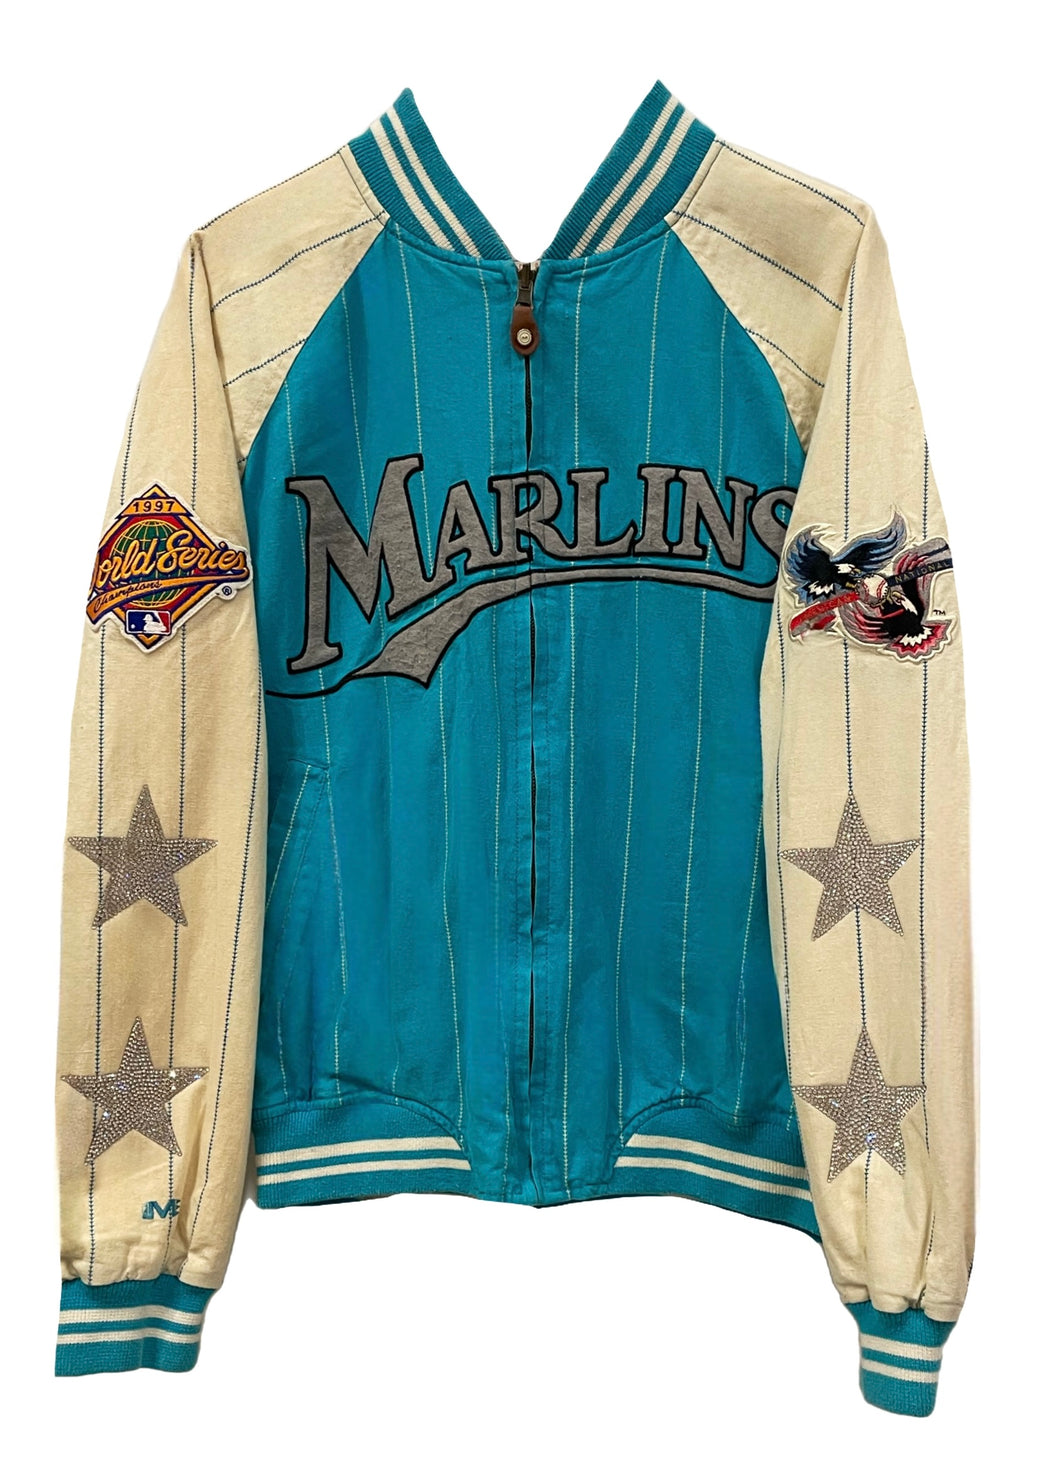 Miami Marlins, MLB One of a KIND Vintage “Rare Find” 1997 Jacket with Crystal Star Design